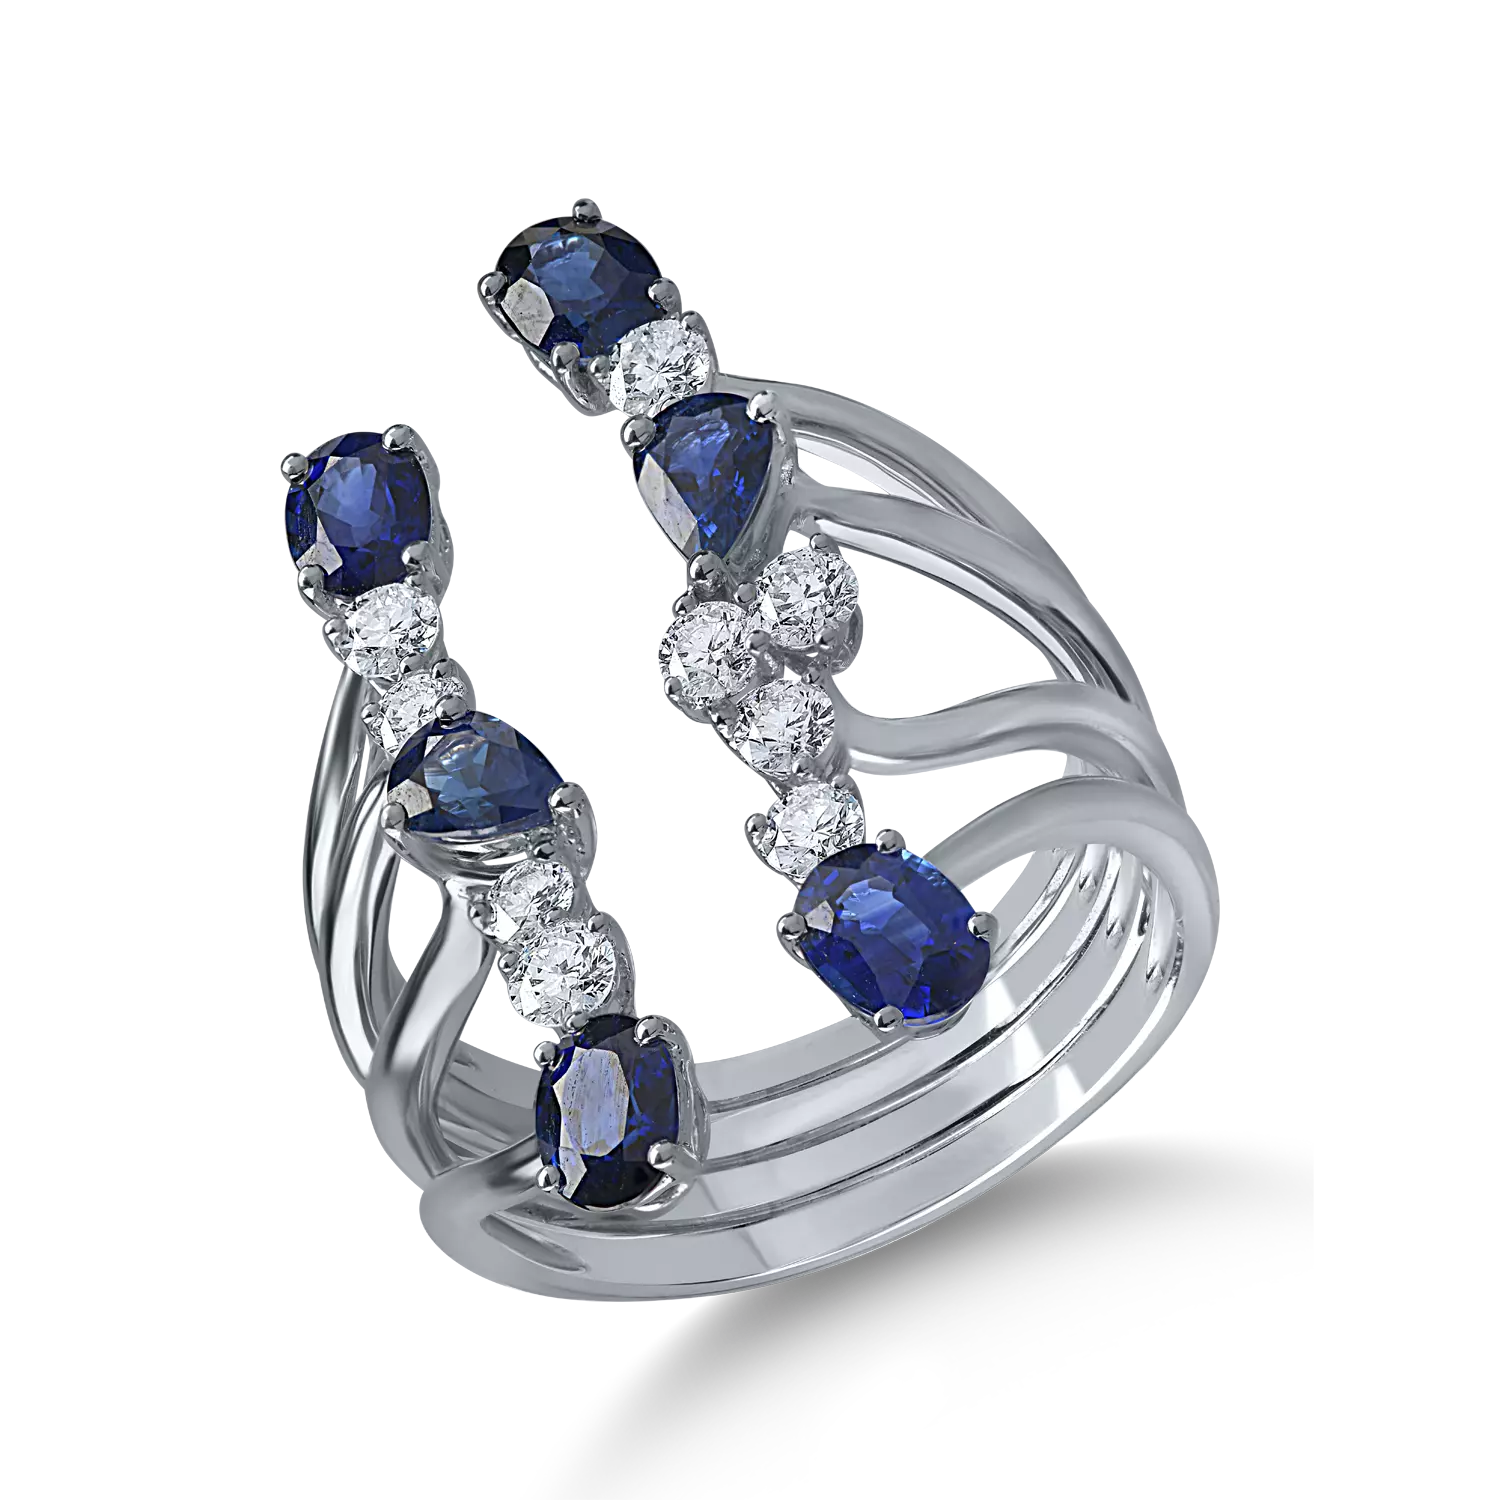 White gold ring with 1.7ct sapphires and 0.4ct diamonds